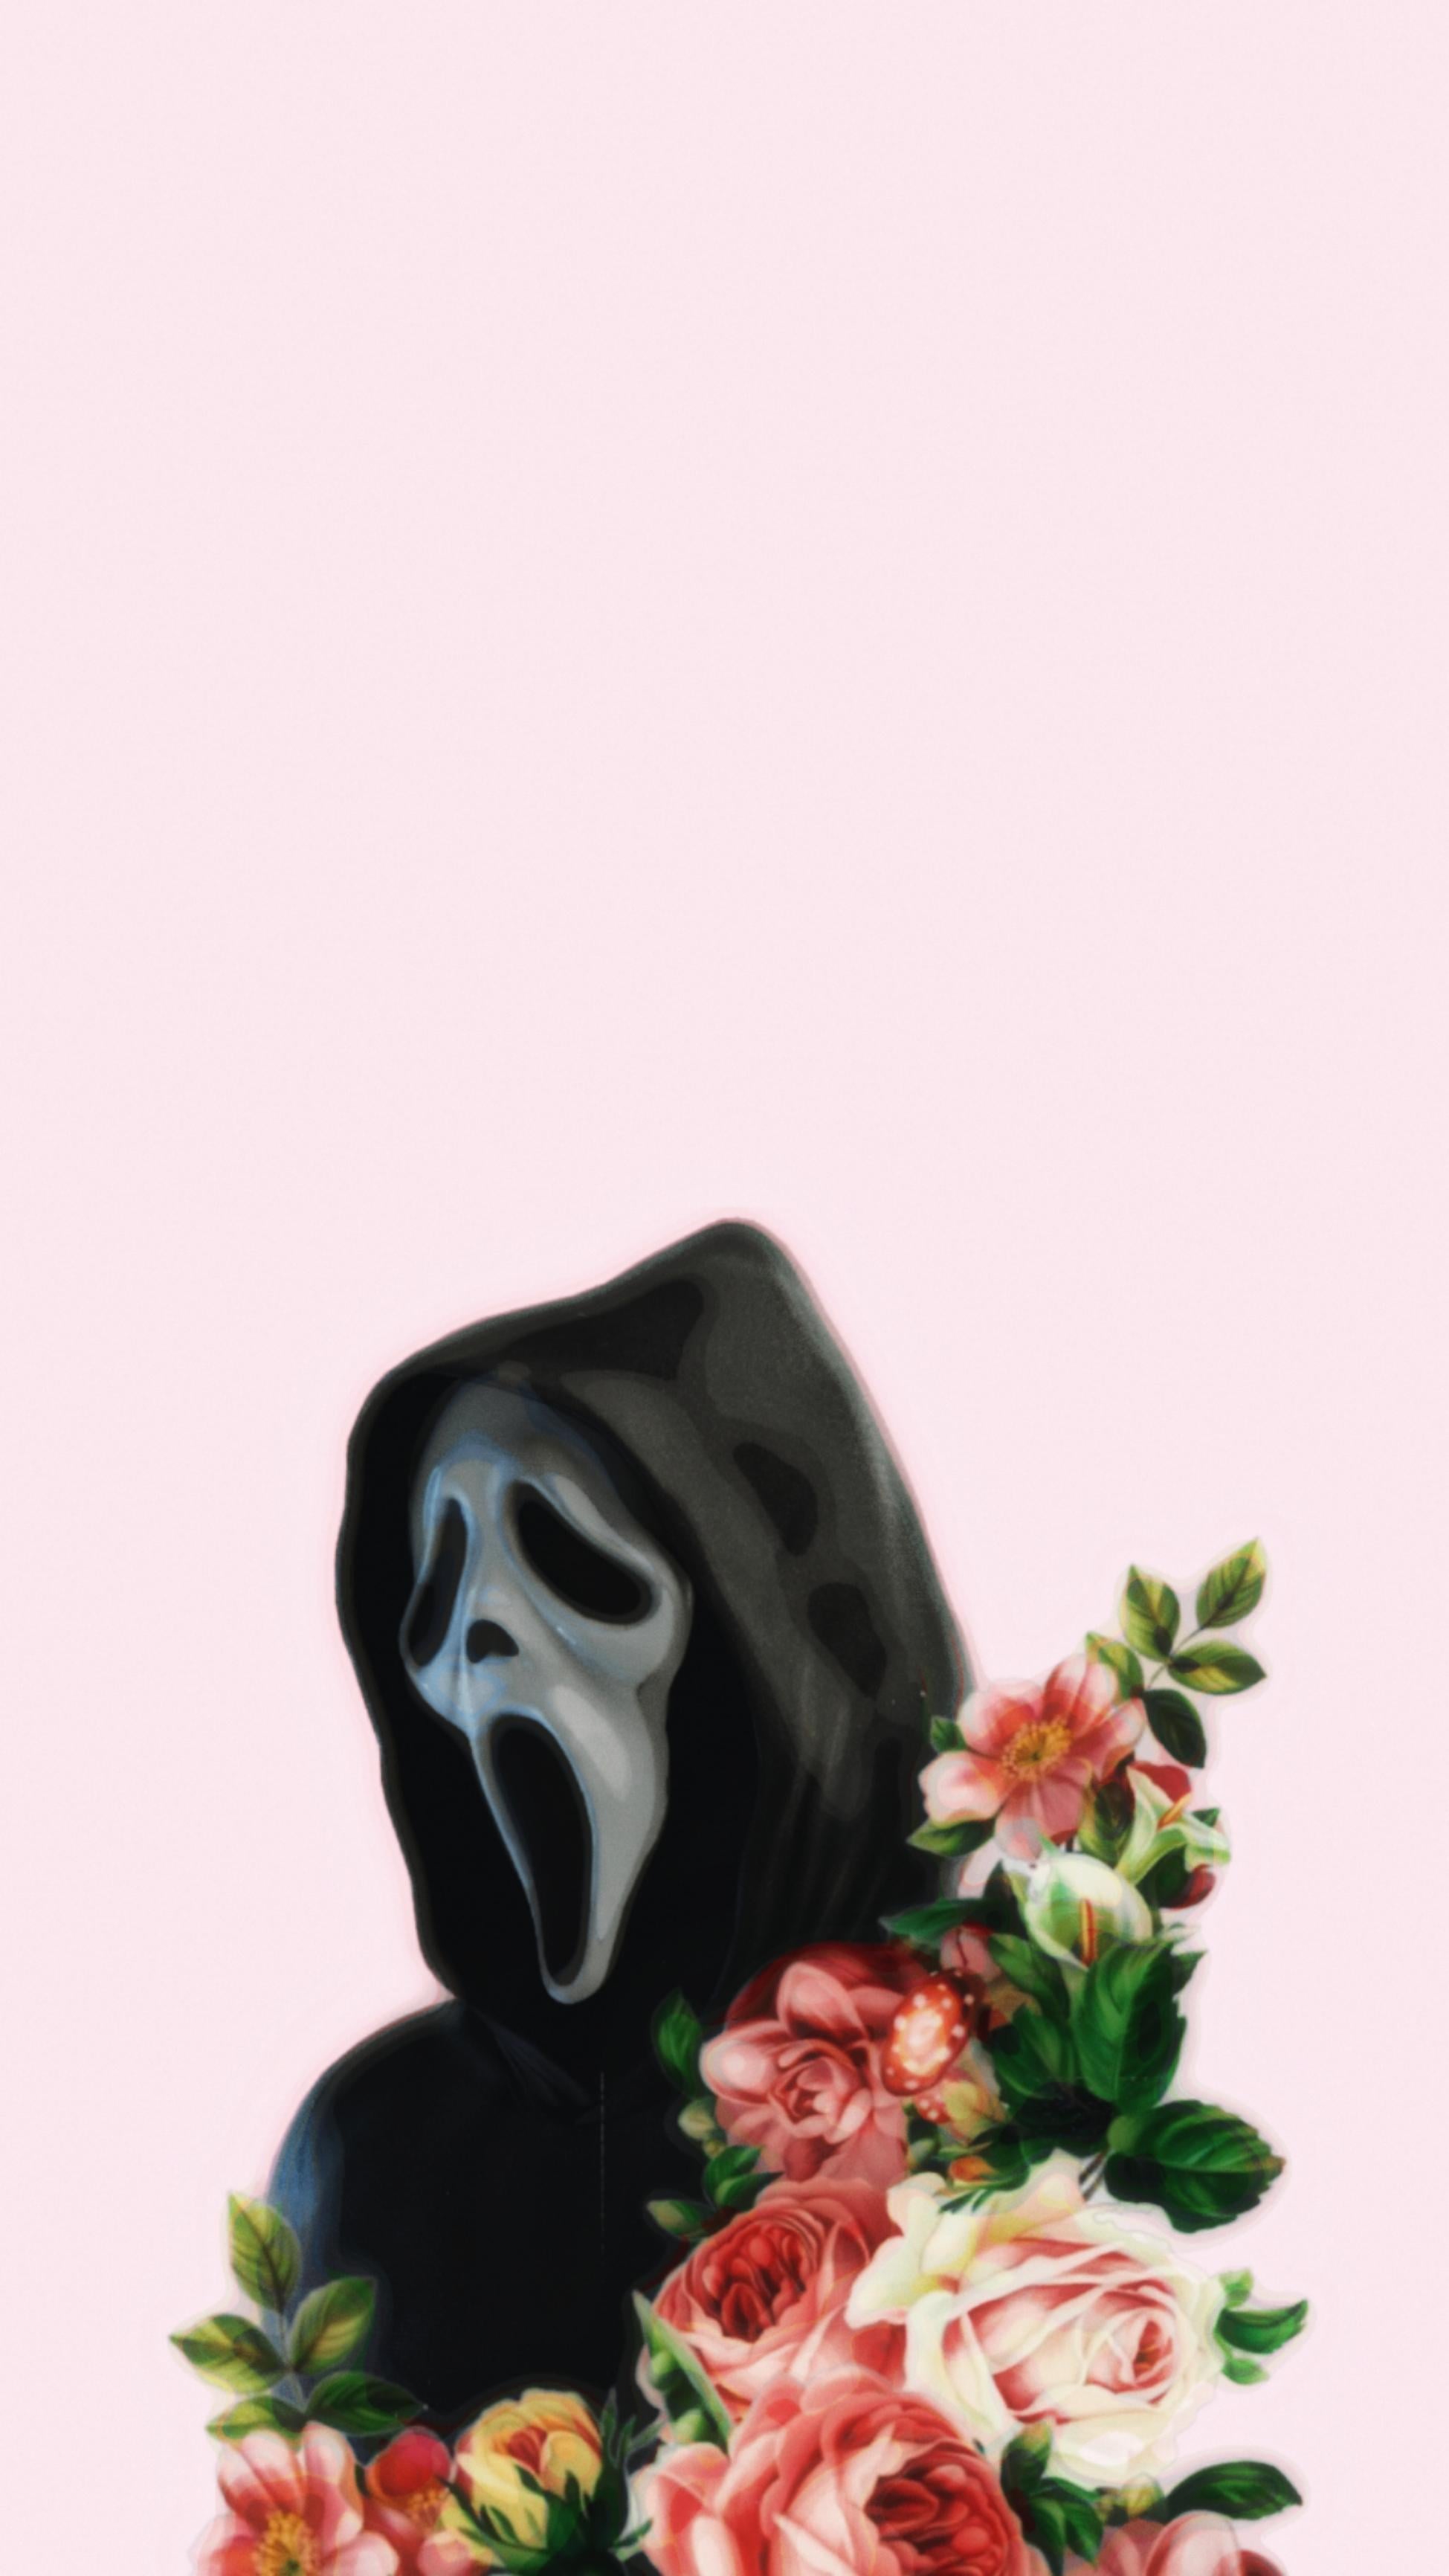 Who would have thought floral, girly Ghostface wallpaper would be hard to find?